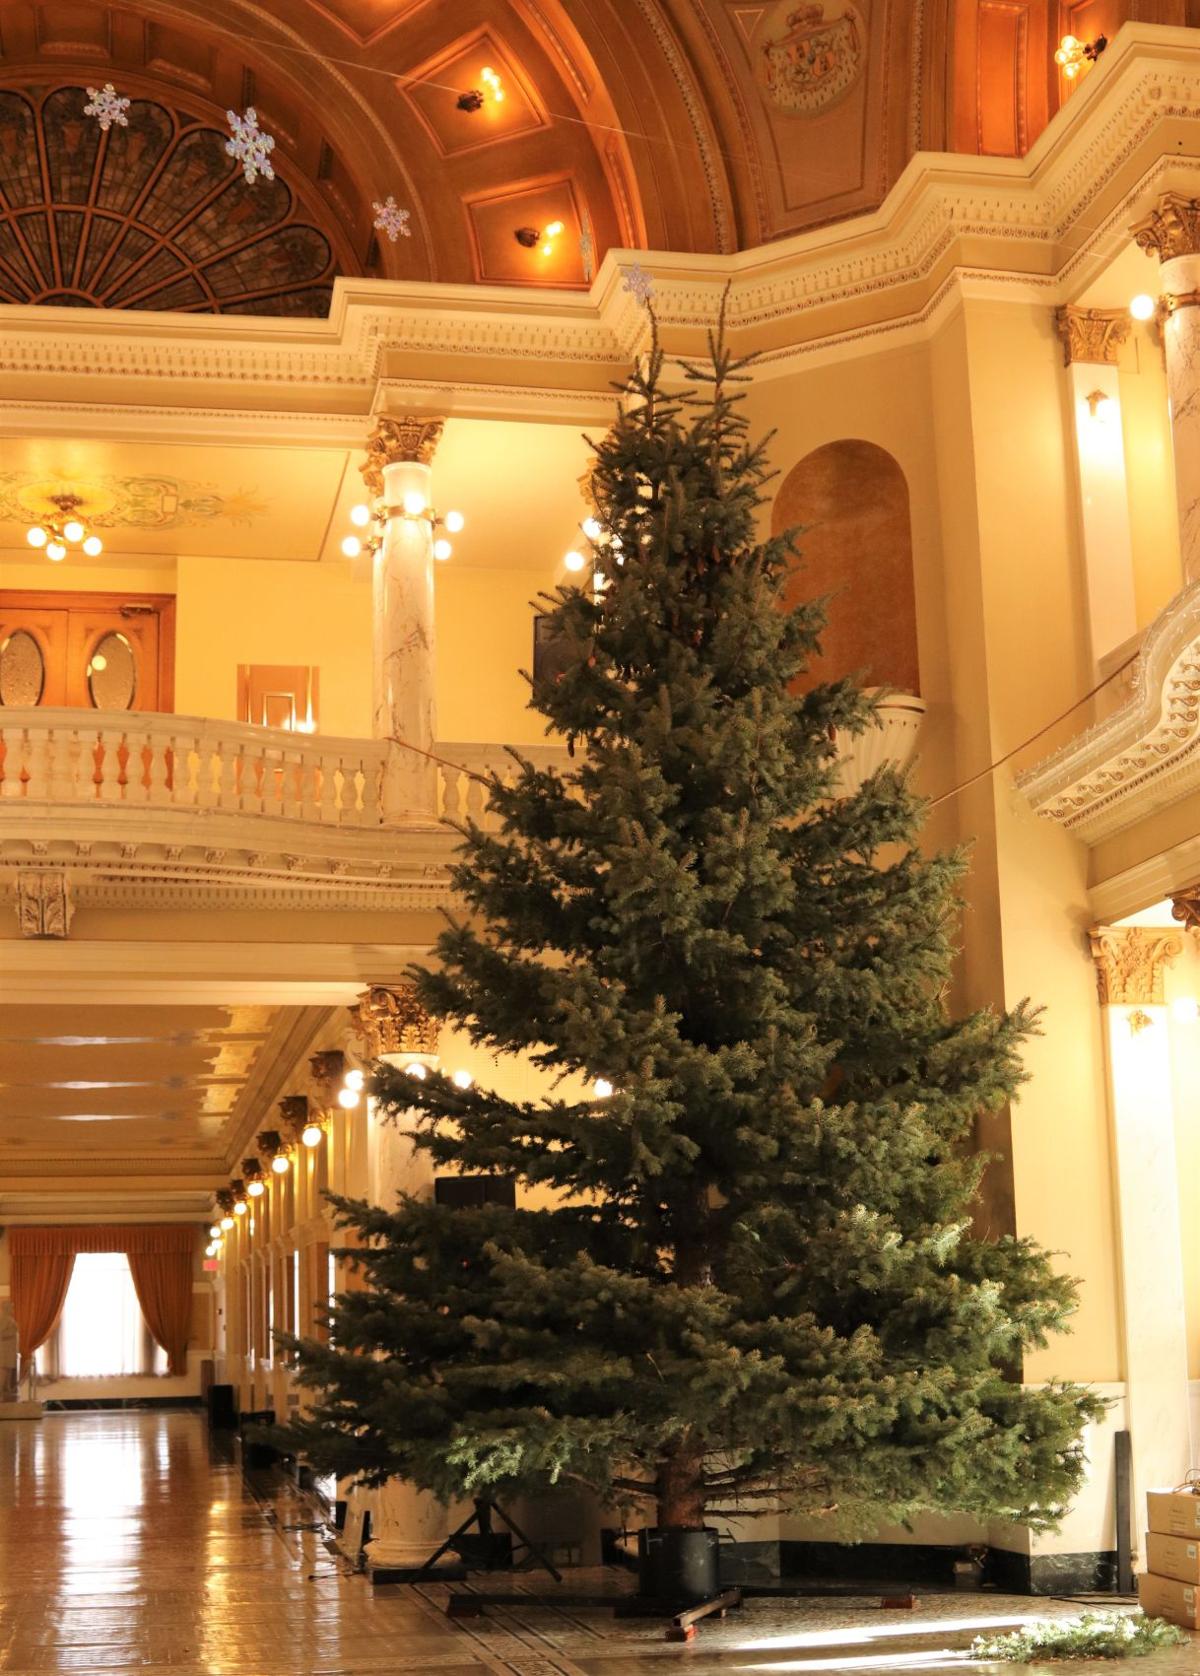 The 2019 Christmas tree in the SD Capitol Rotunda grew up in Pierre